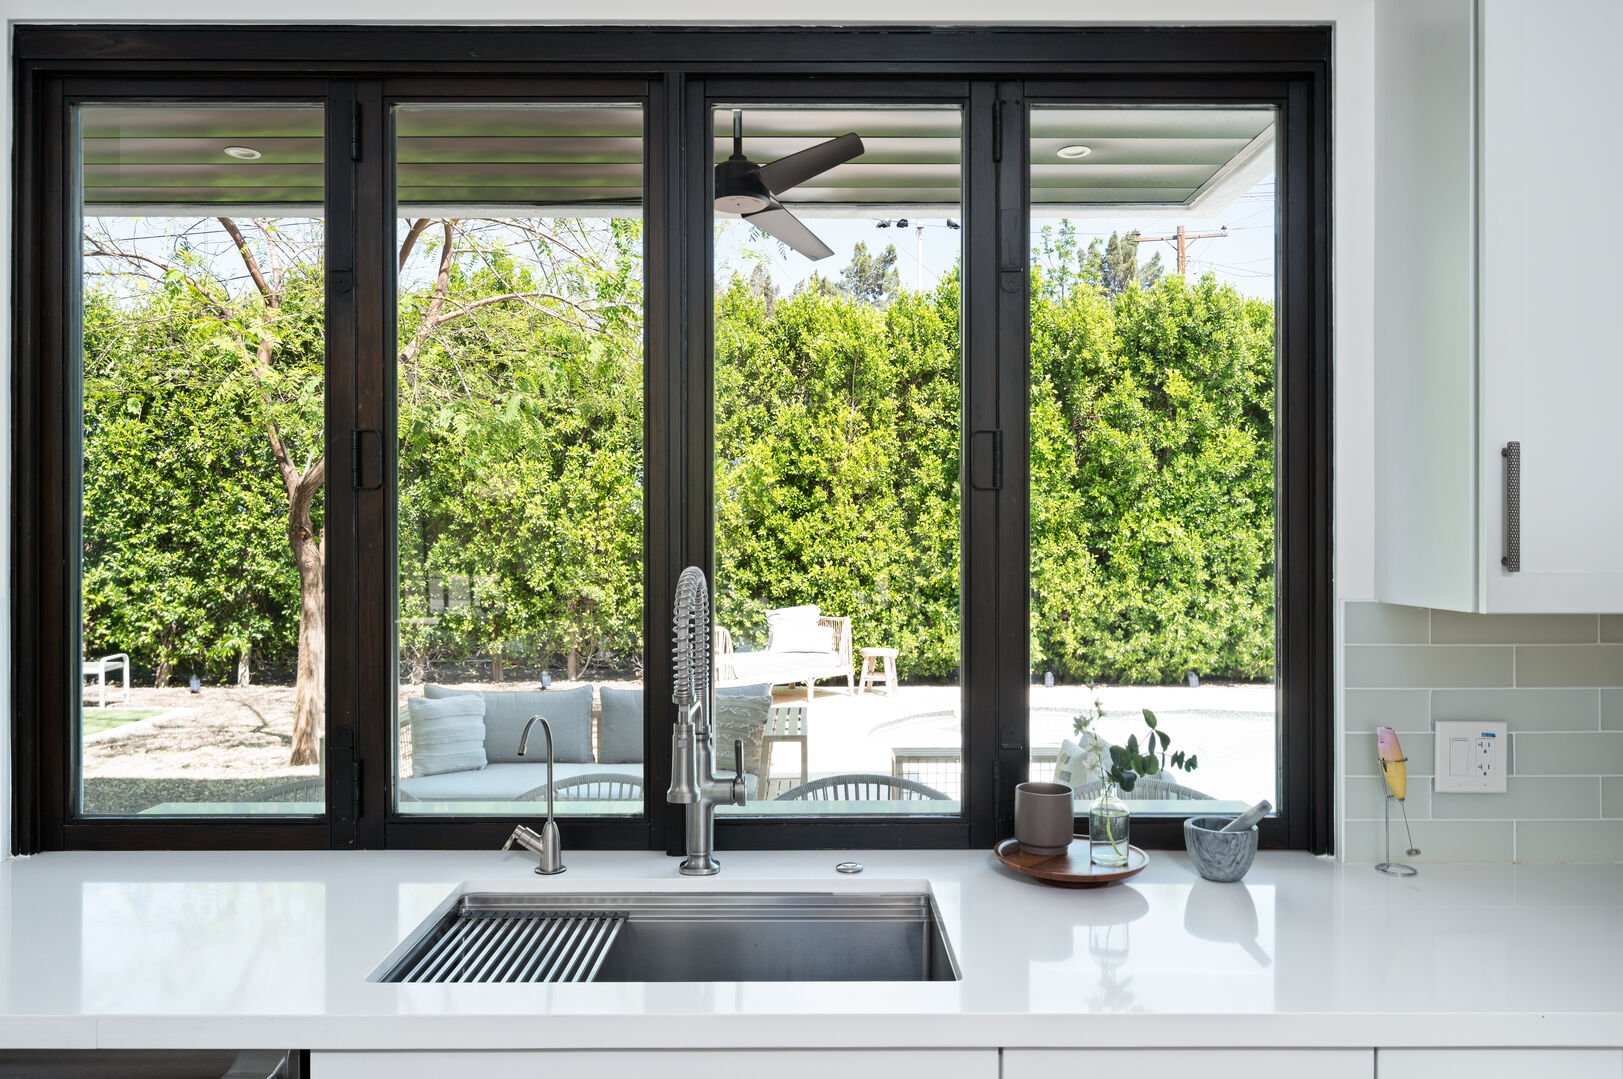 Let the natural air in by opening up the kitchen window!